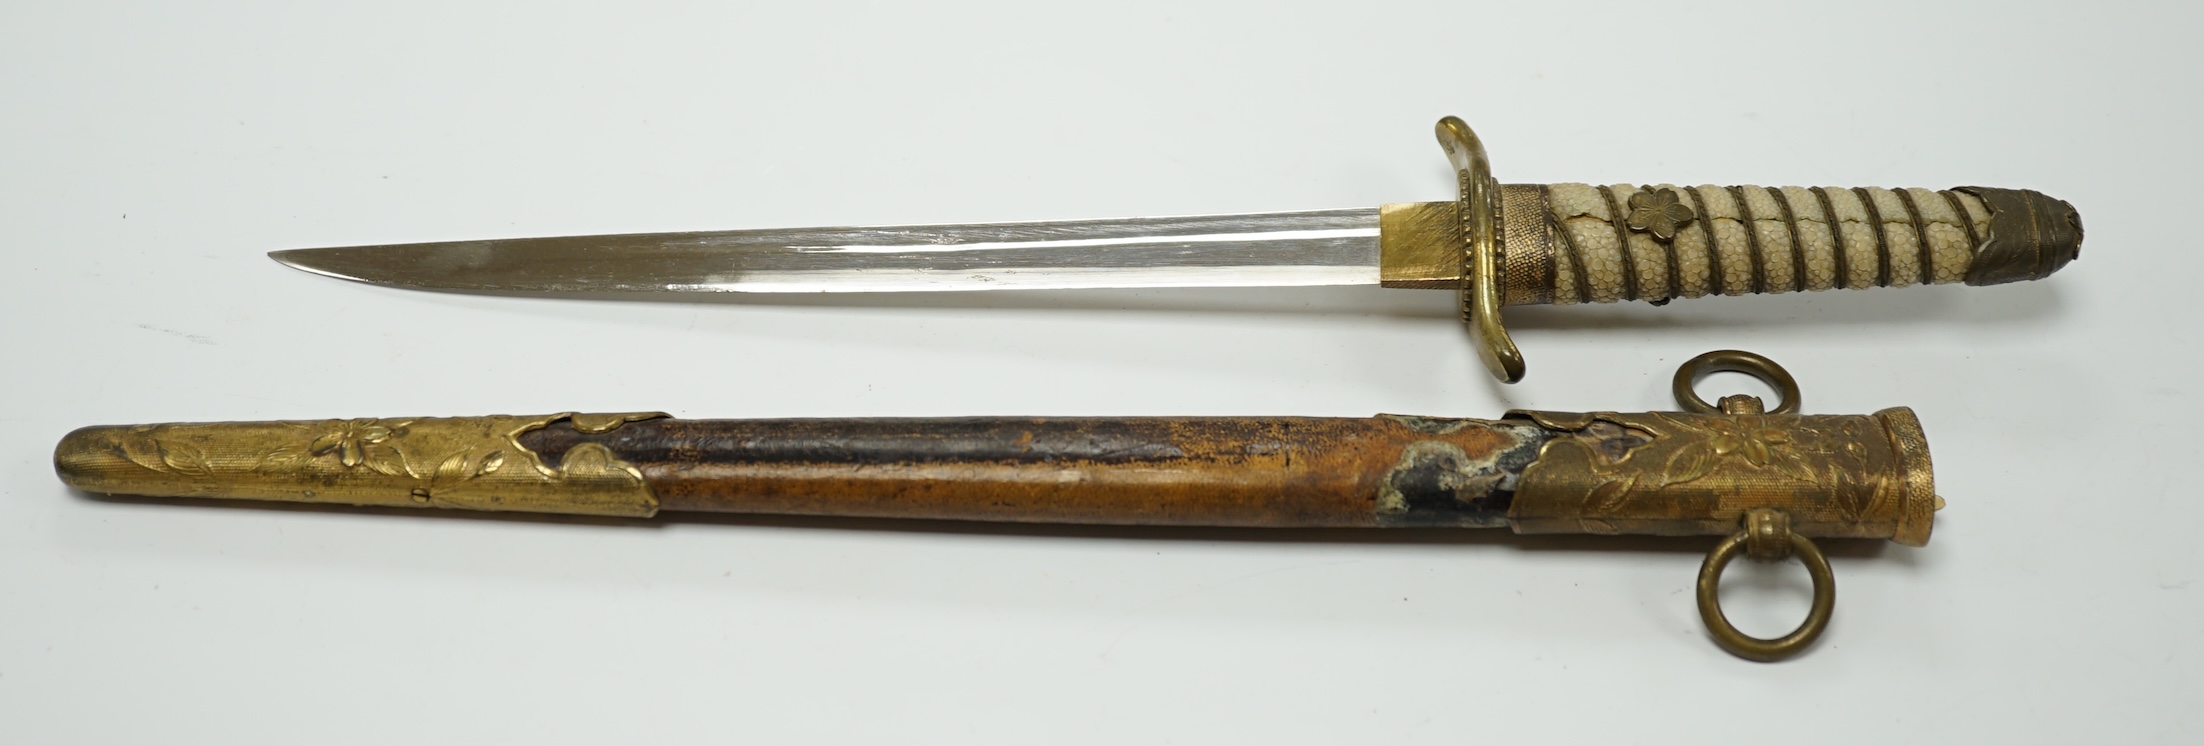 A dagger with brass fittings and a shagreen grip, in a leather covered scabbard, blade 21cm. Condition - losses to leatherwork and scabbard, splits to shagreen grip and some wear overall.